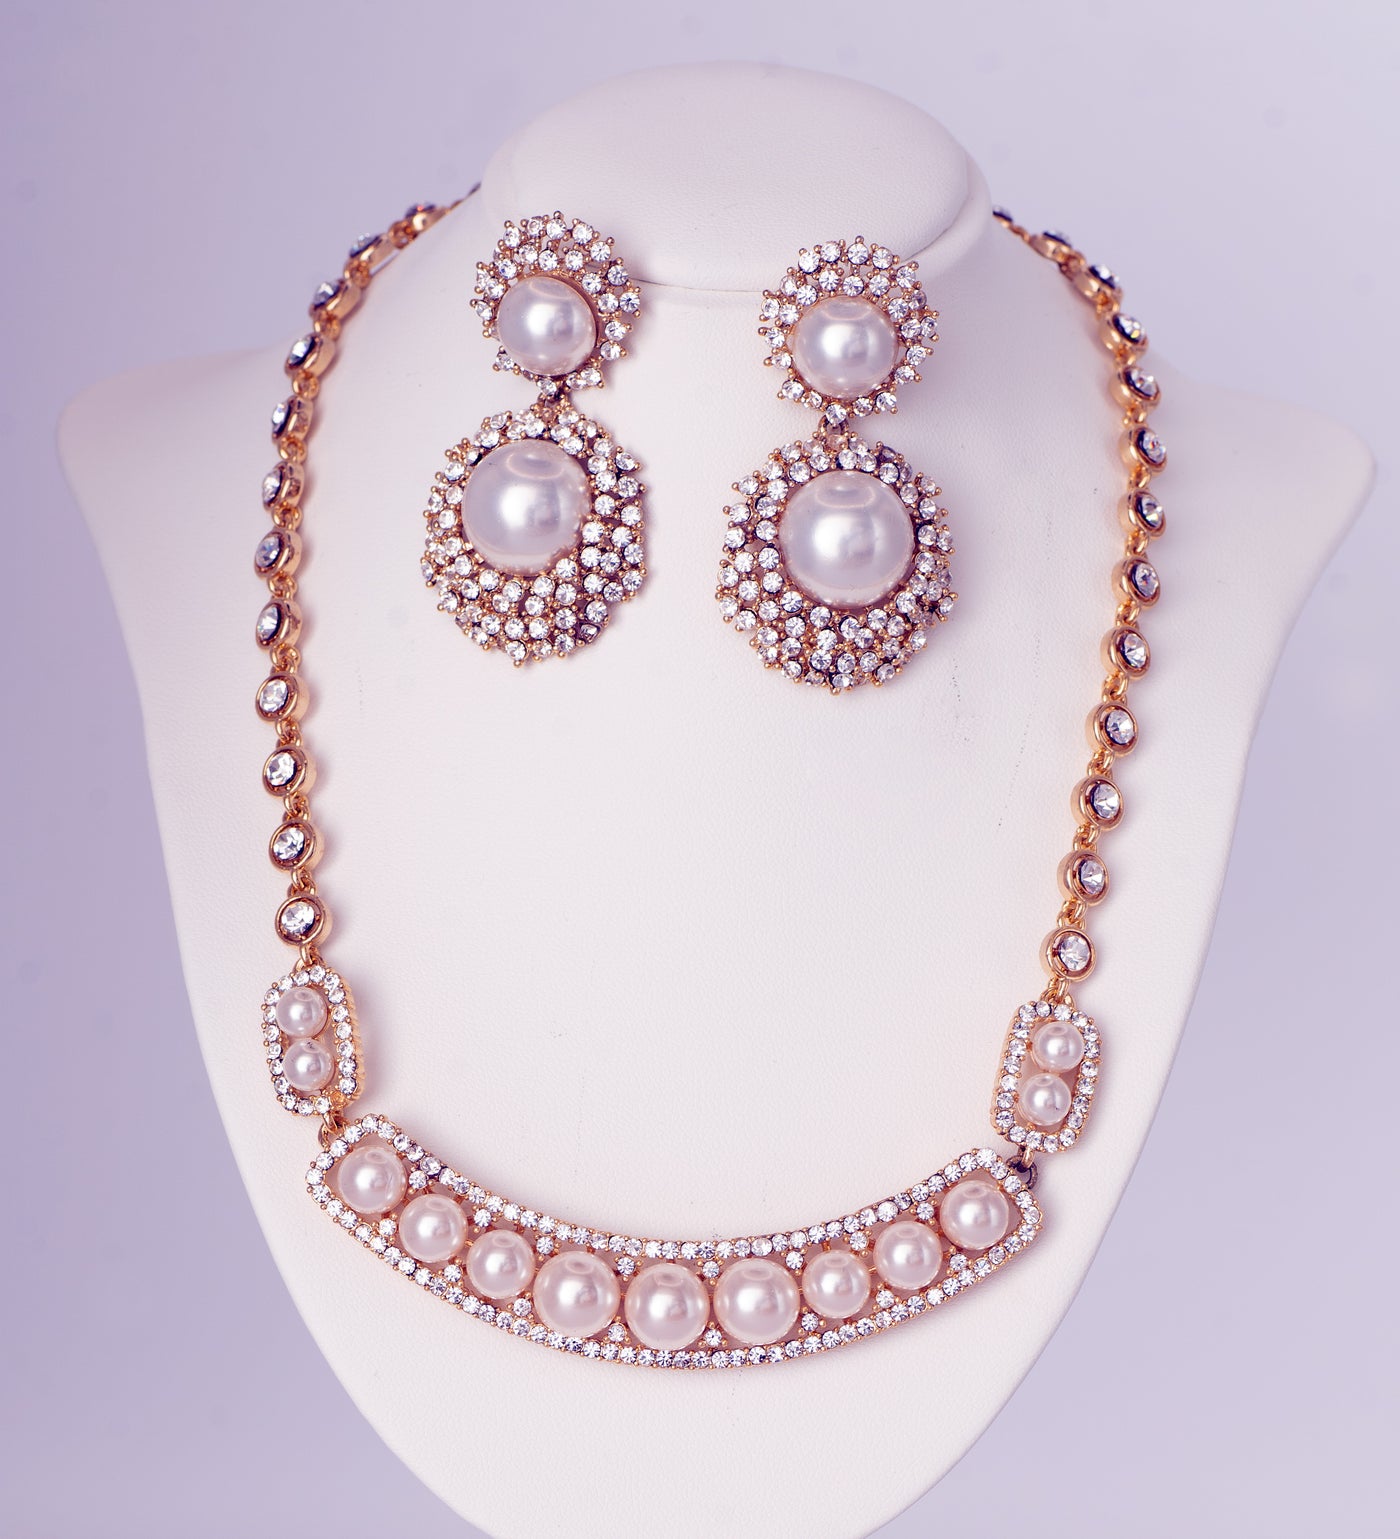 necklace and earring set